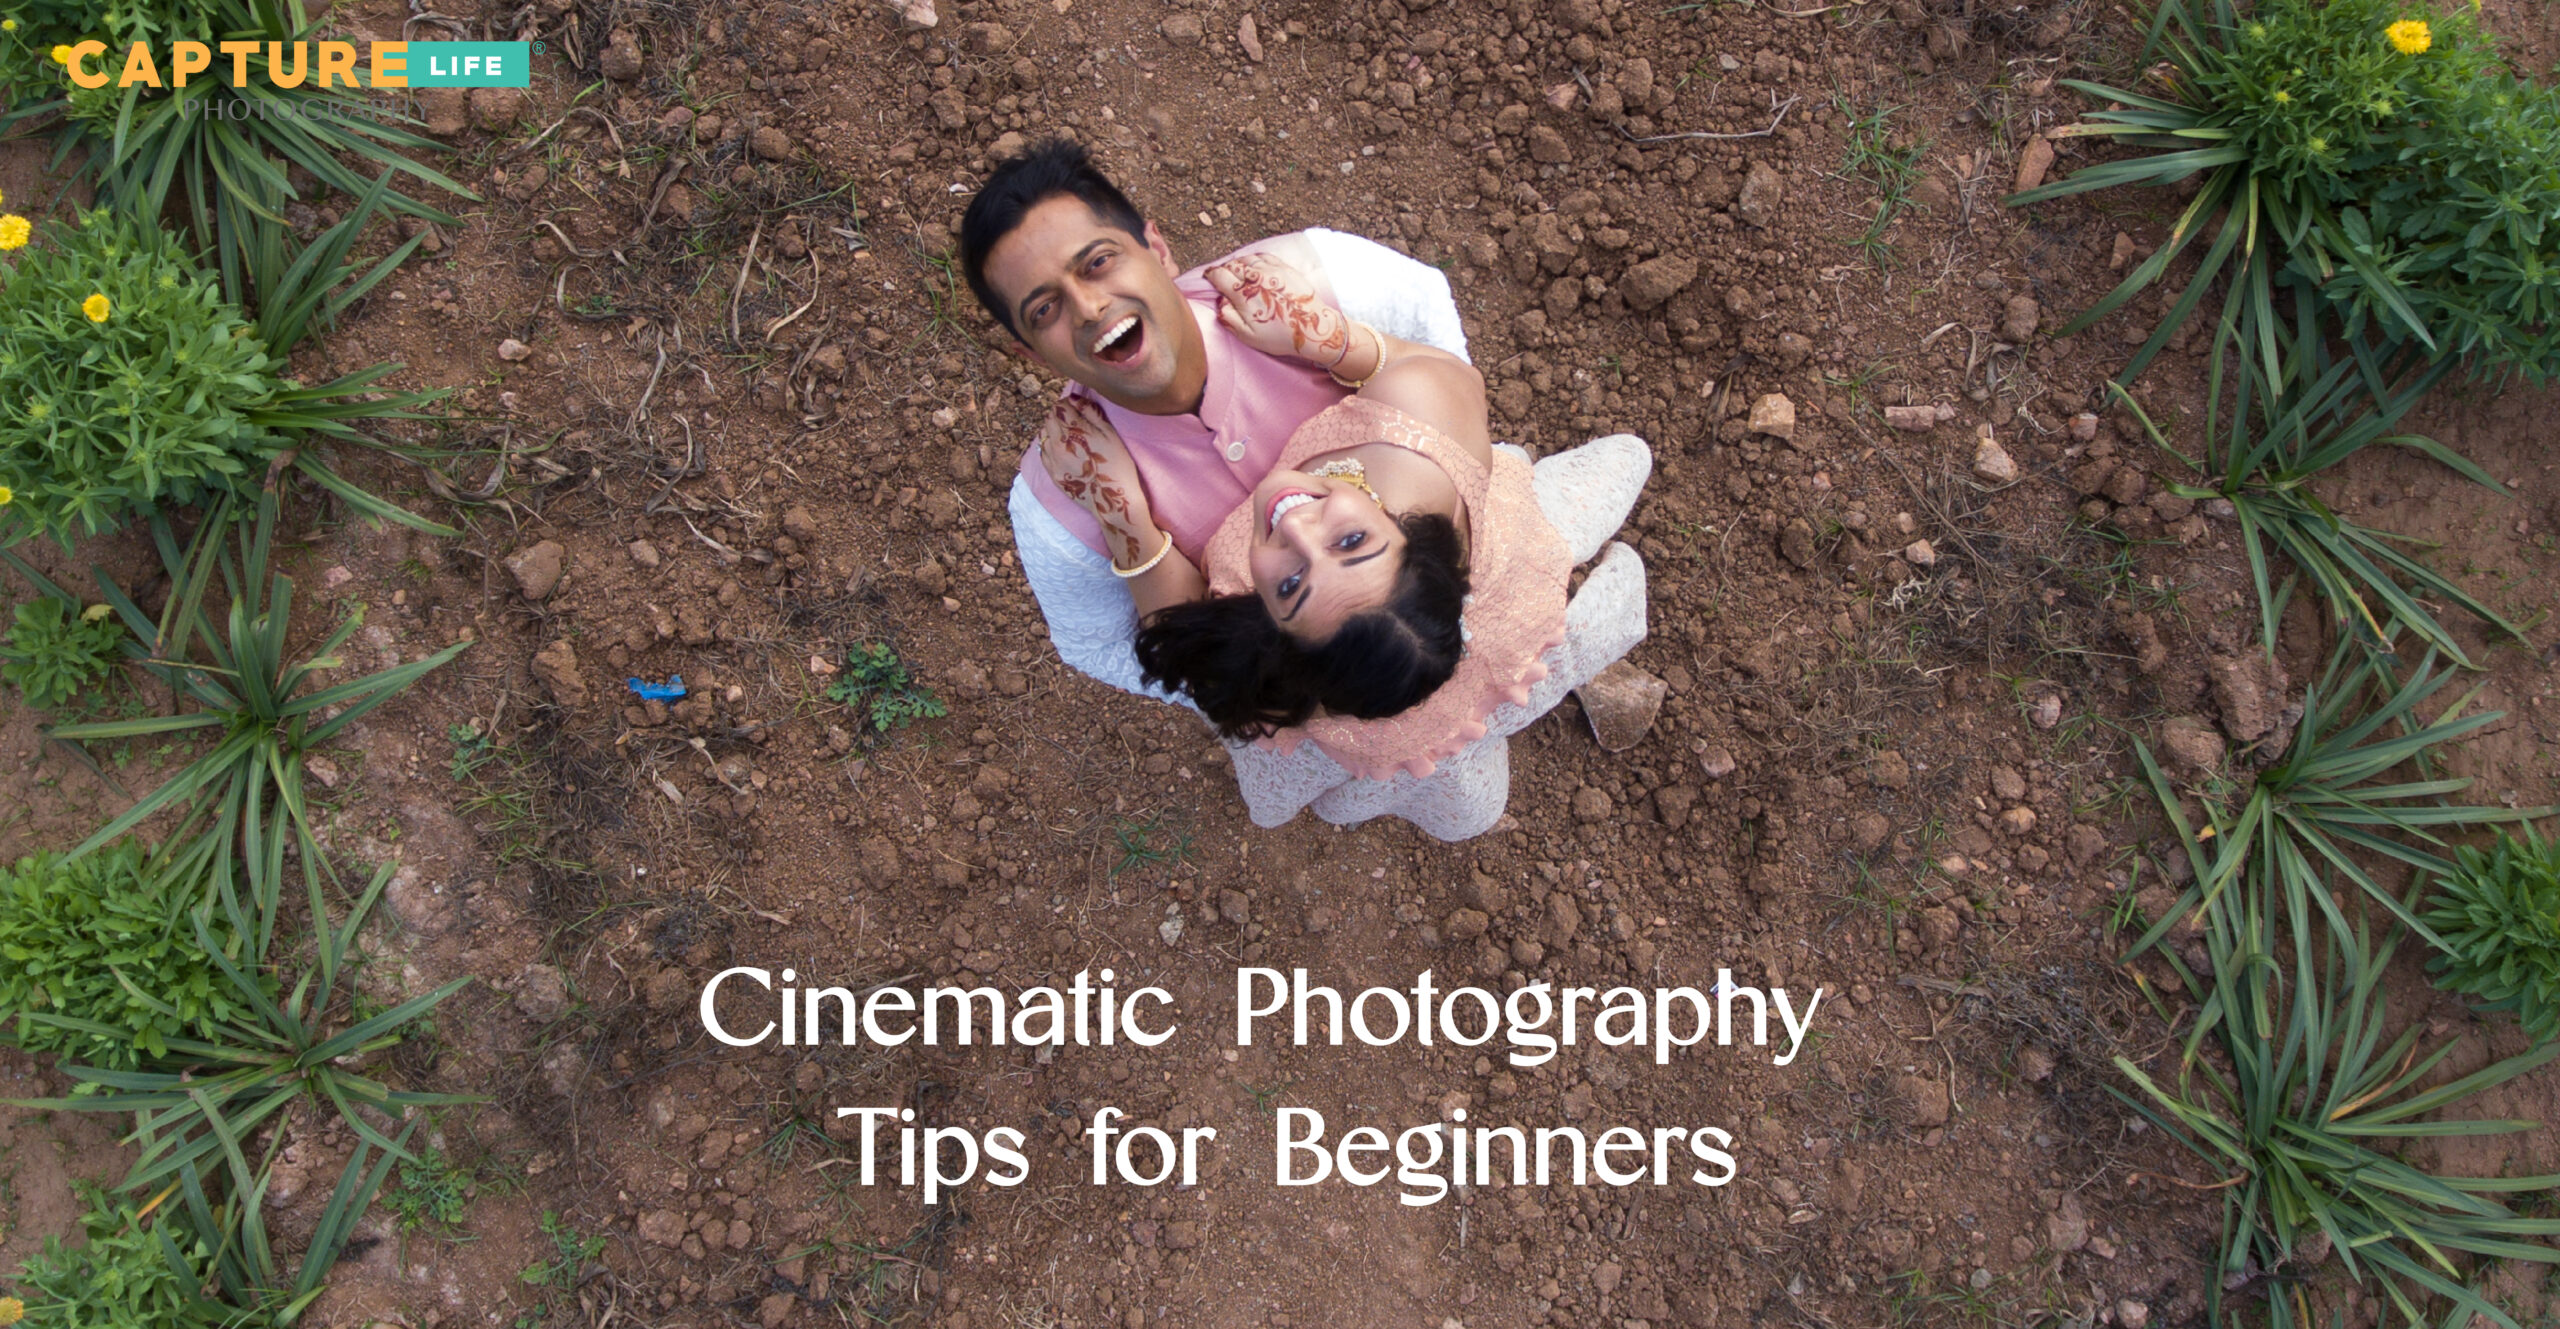 Cinematic photography tips